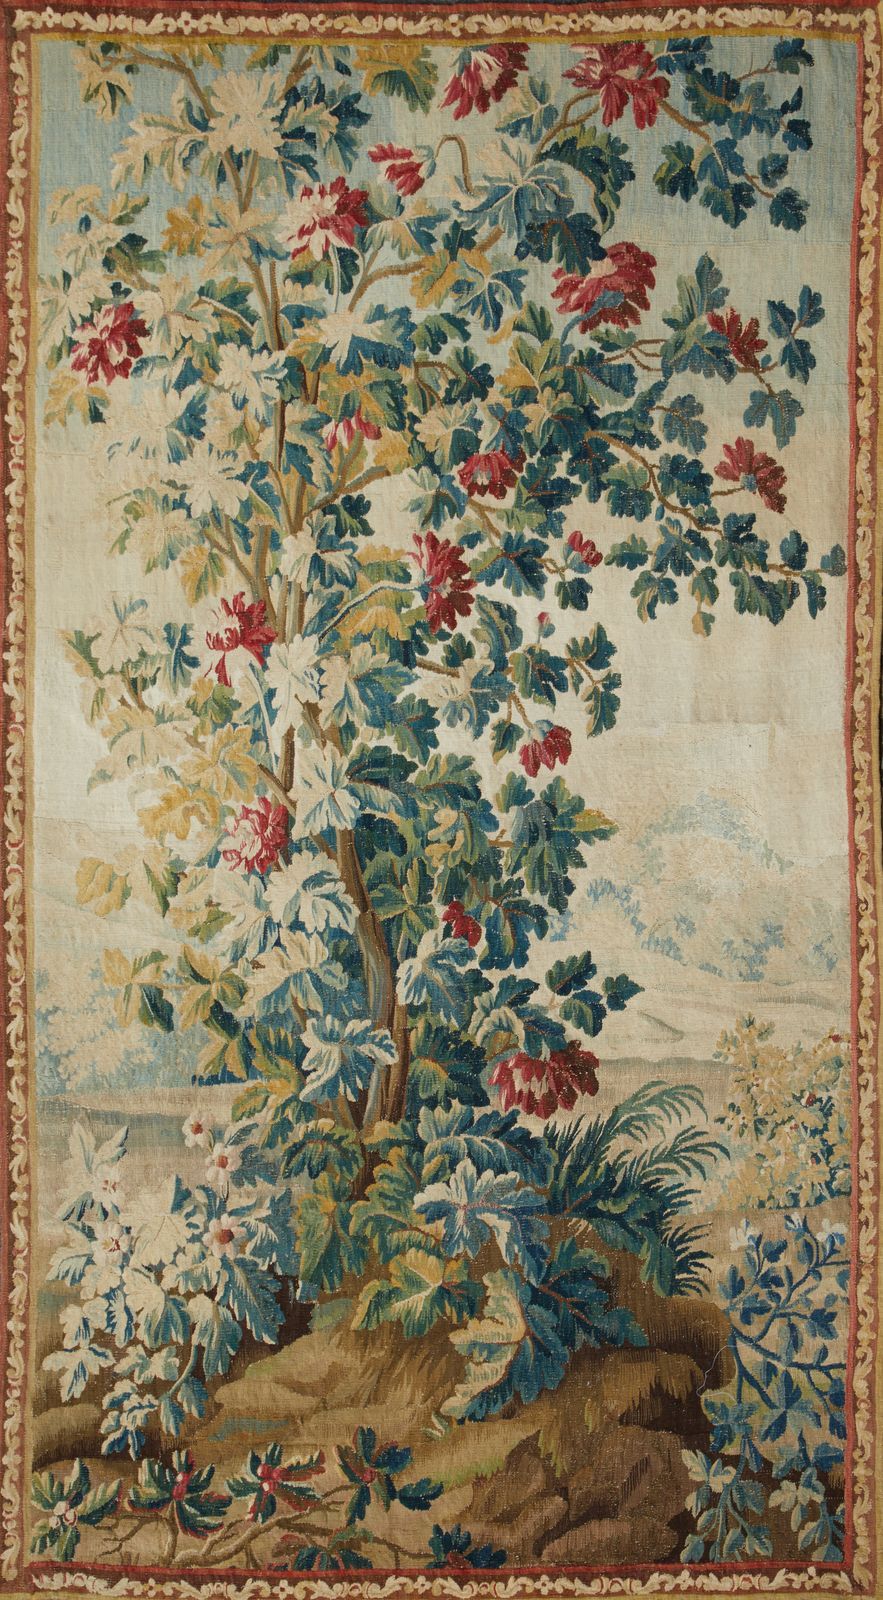 Null 562 Aubusson "l'arbre fleuri" (the flowering tree)
Polychrome wool tapestry&hellip;